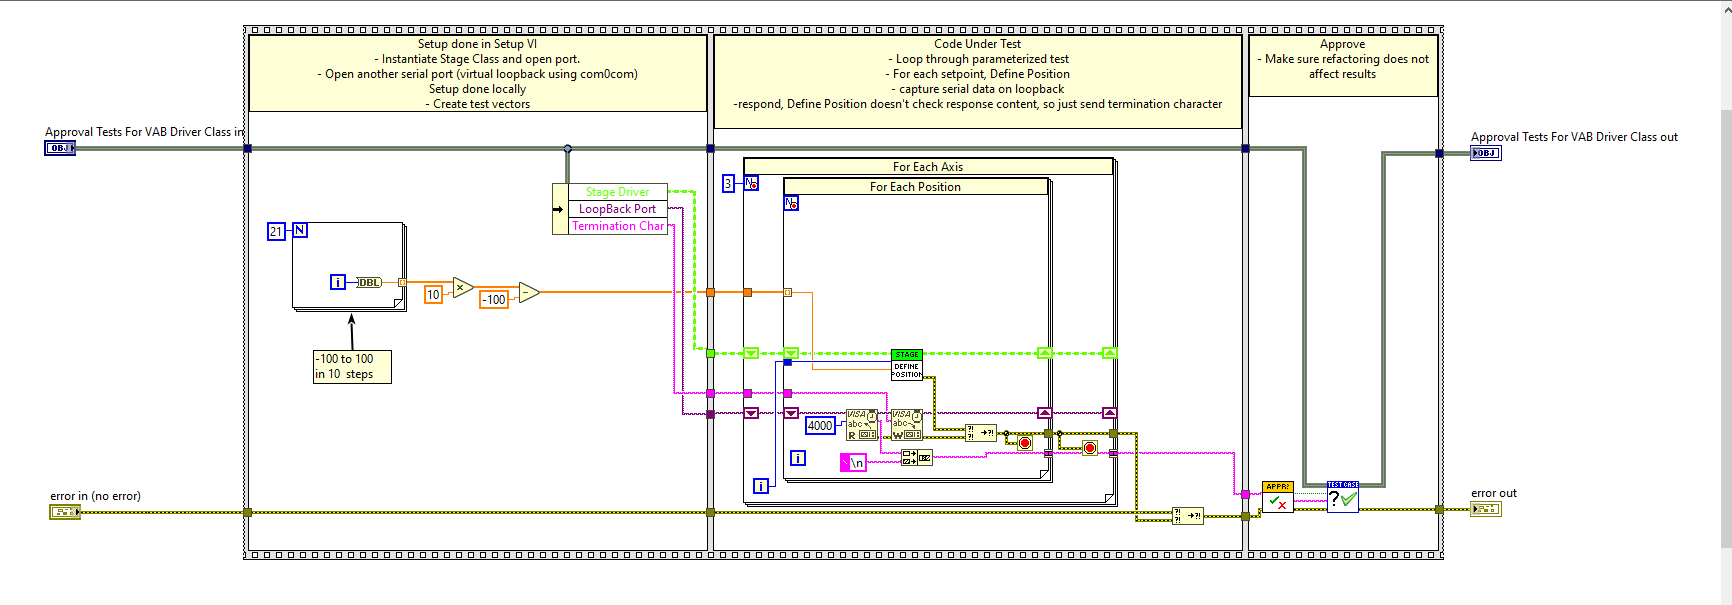 An example of an approval test for a serial driver in LabVIEW